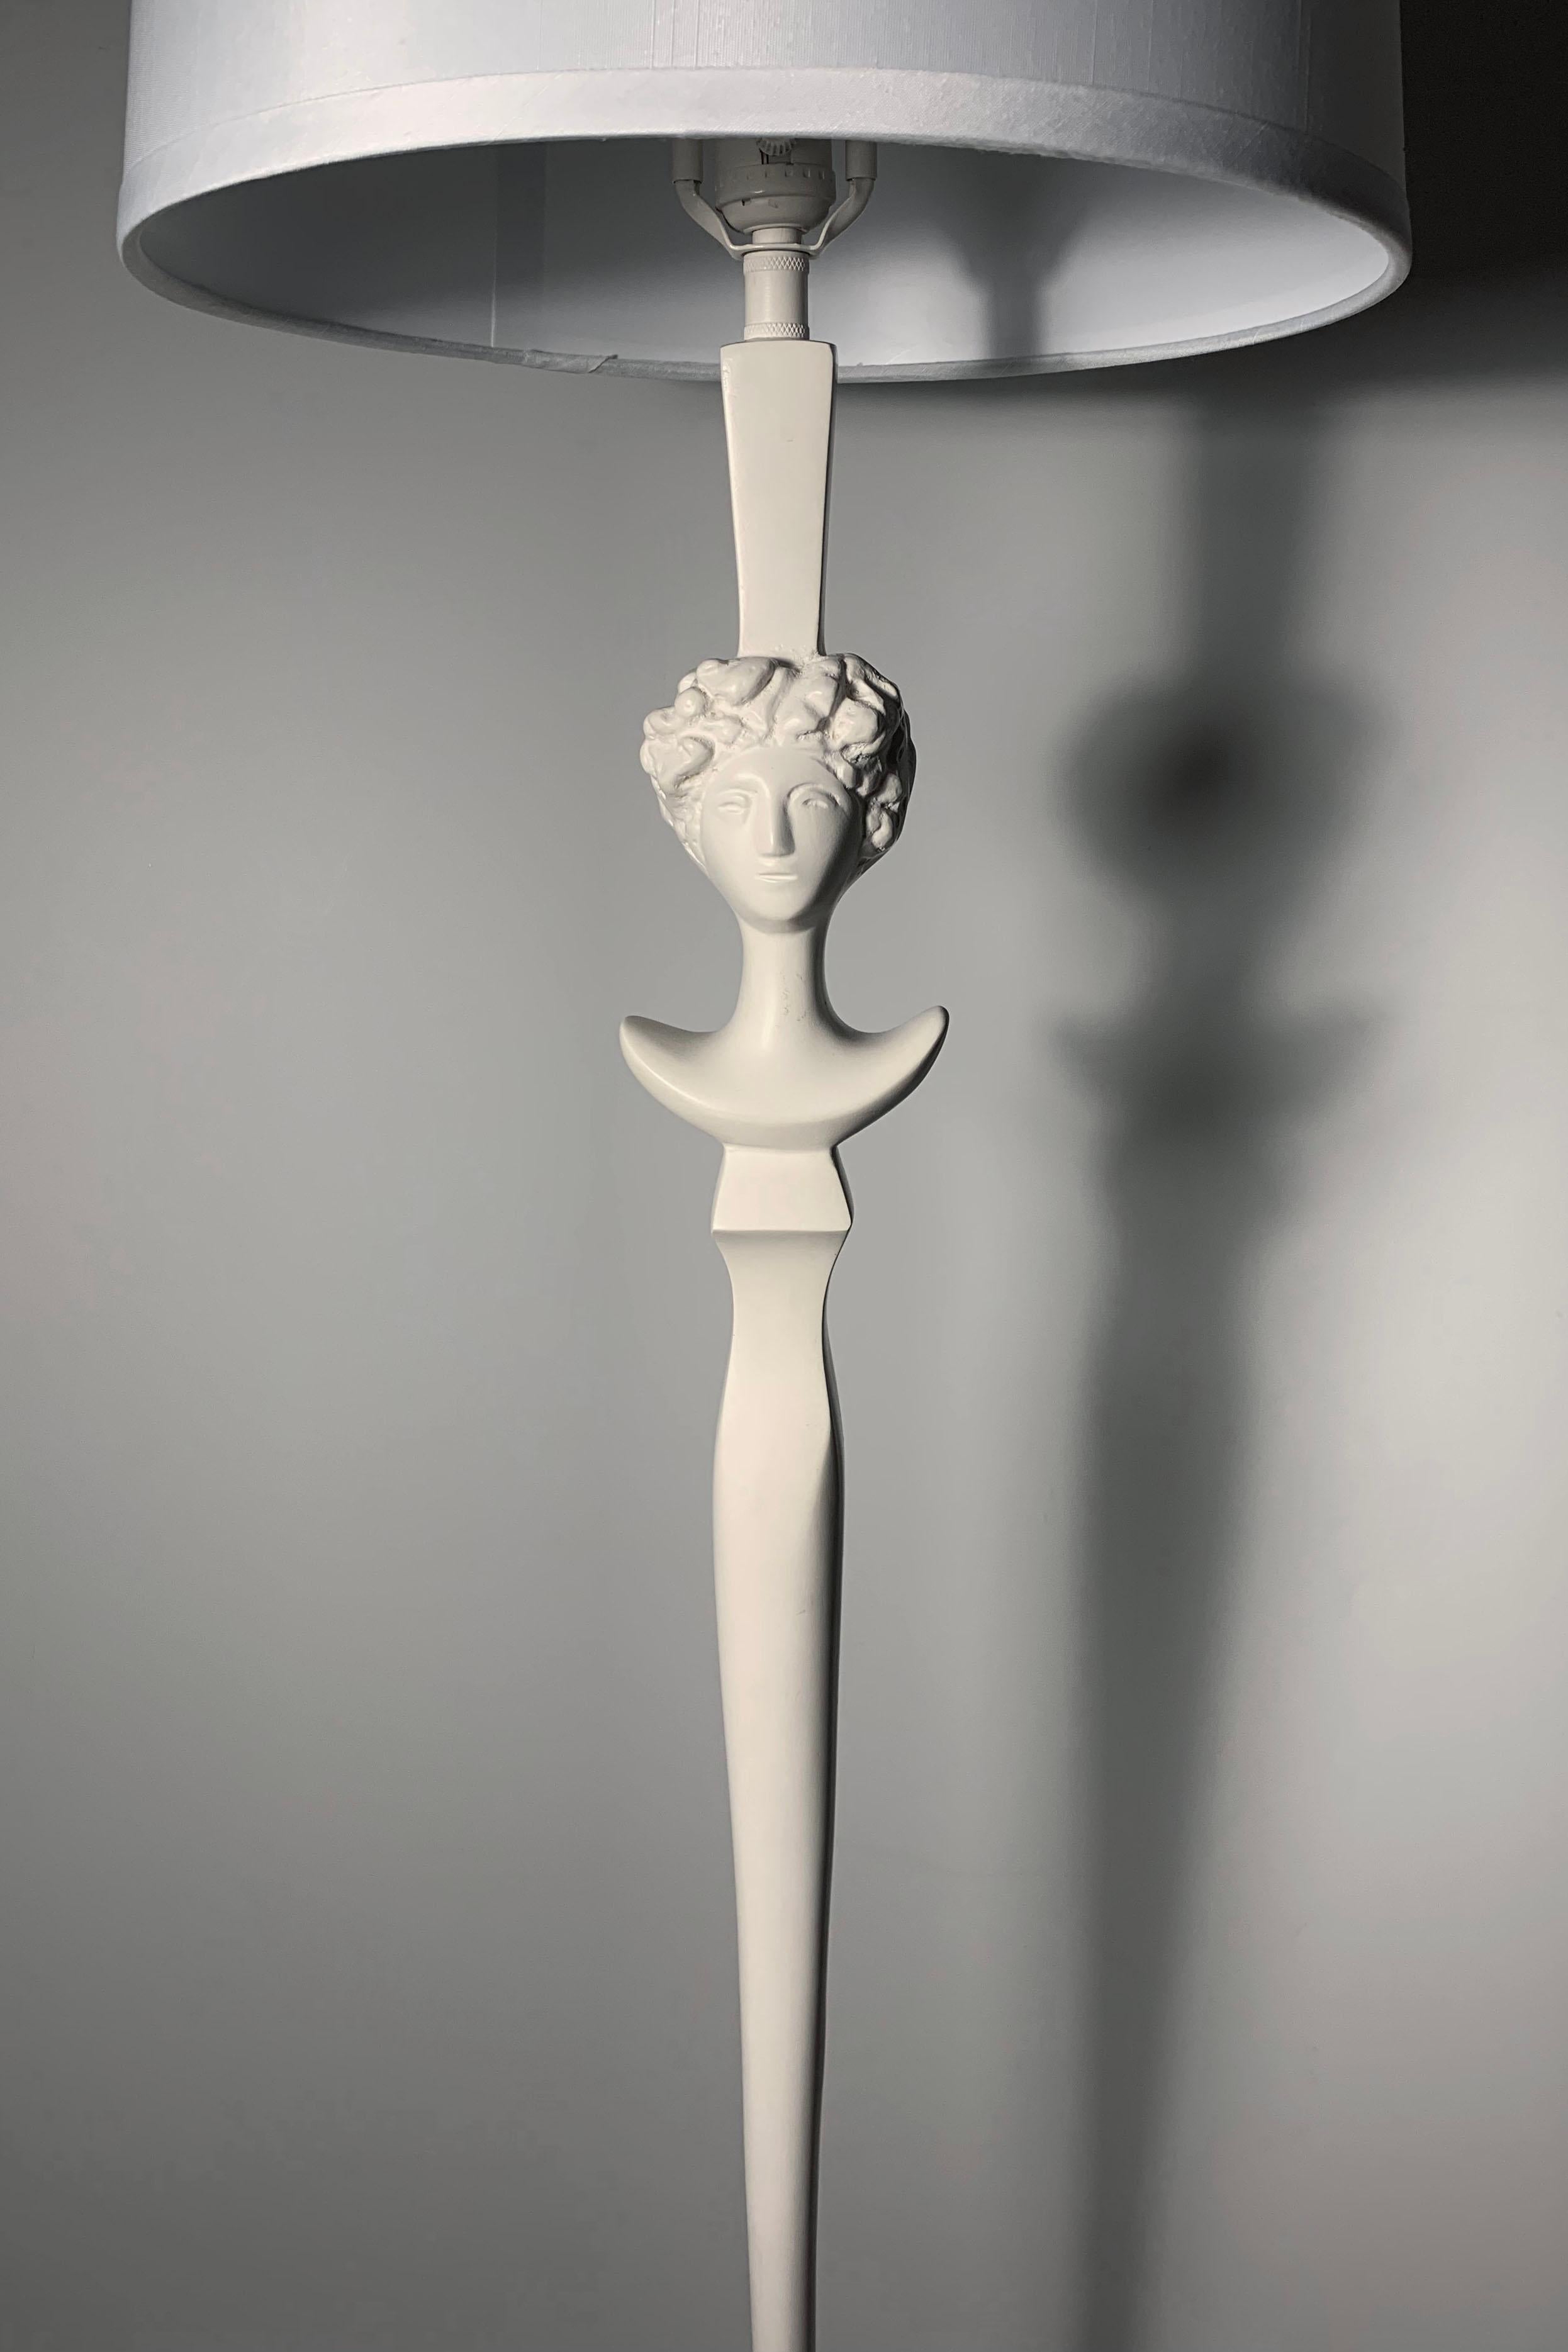 20th Century Pair of Plaster Tete De Femme Floor Lamps by Sirmos After Giacometti